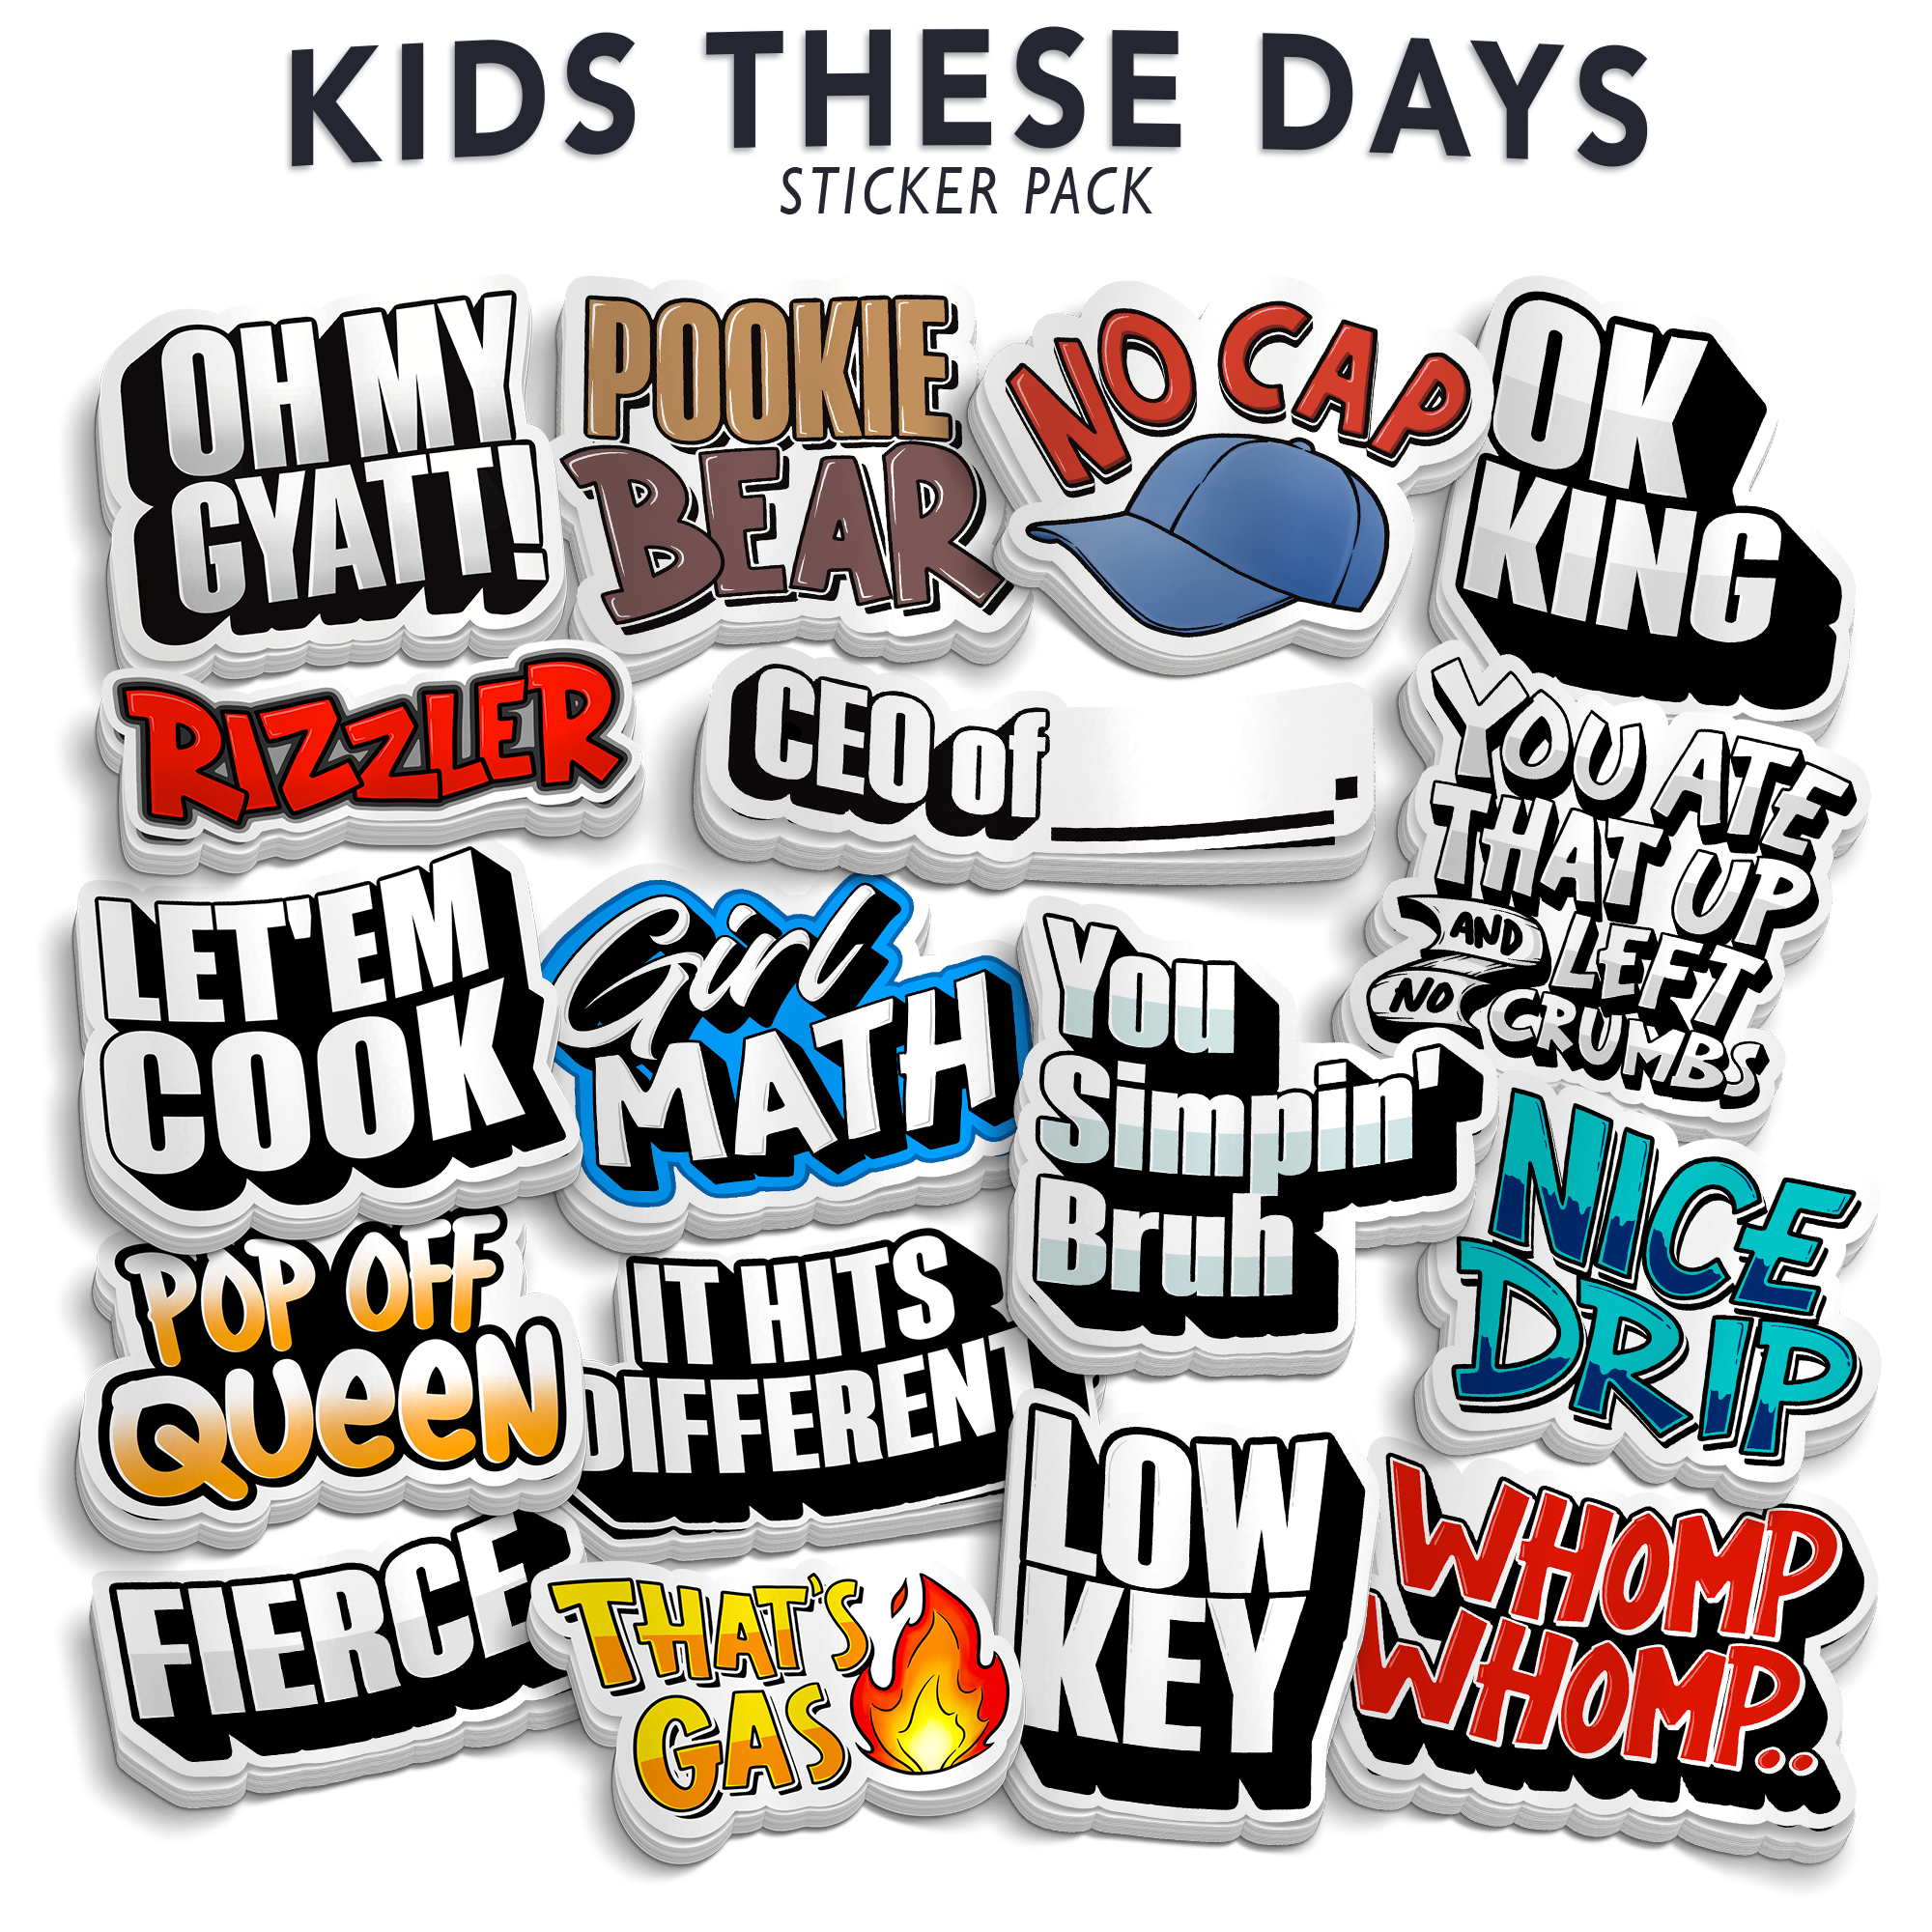 Kids These Day - Funny Sticker Pack